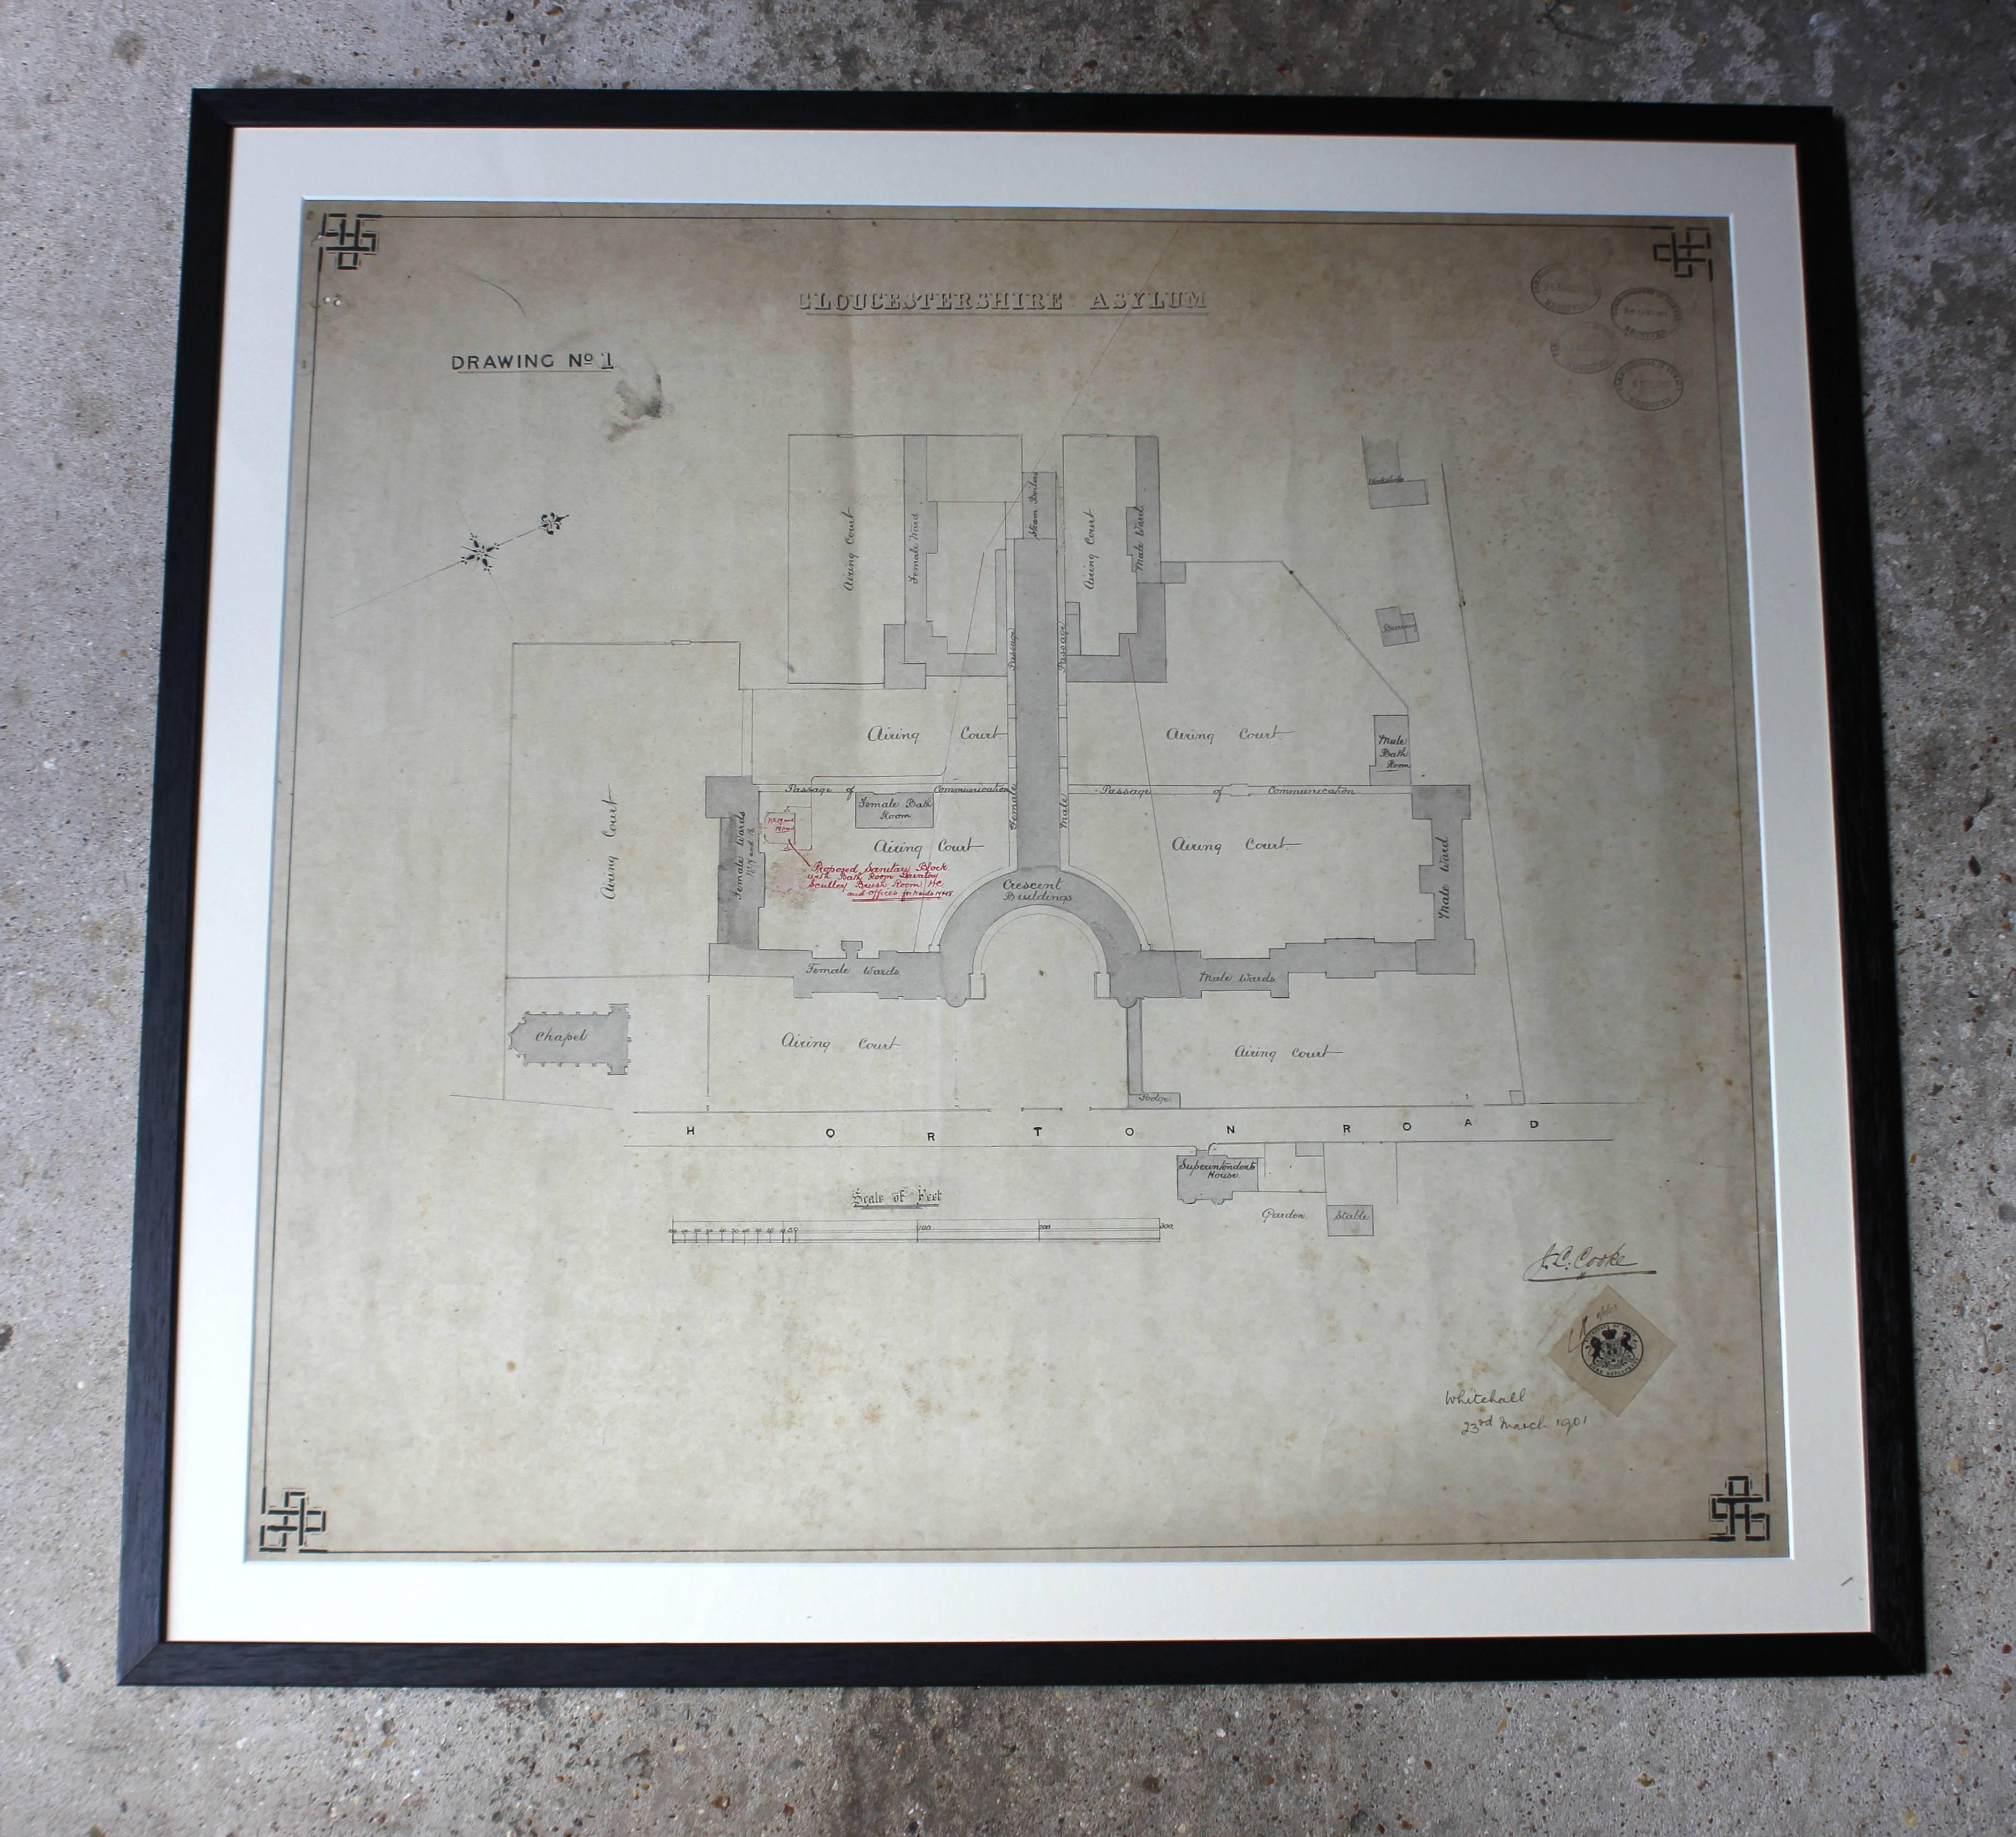 The decorative group of four large architects drawings and one site plan, of mixed sizes, each framed and glazed, comprising three drawings dated 1880 and one dated 1906, all by Giles, Gough and Trollope architects, with the site plan inscribed J C